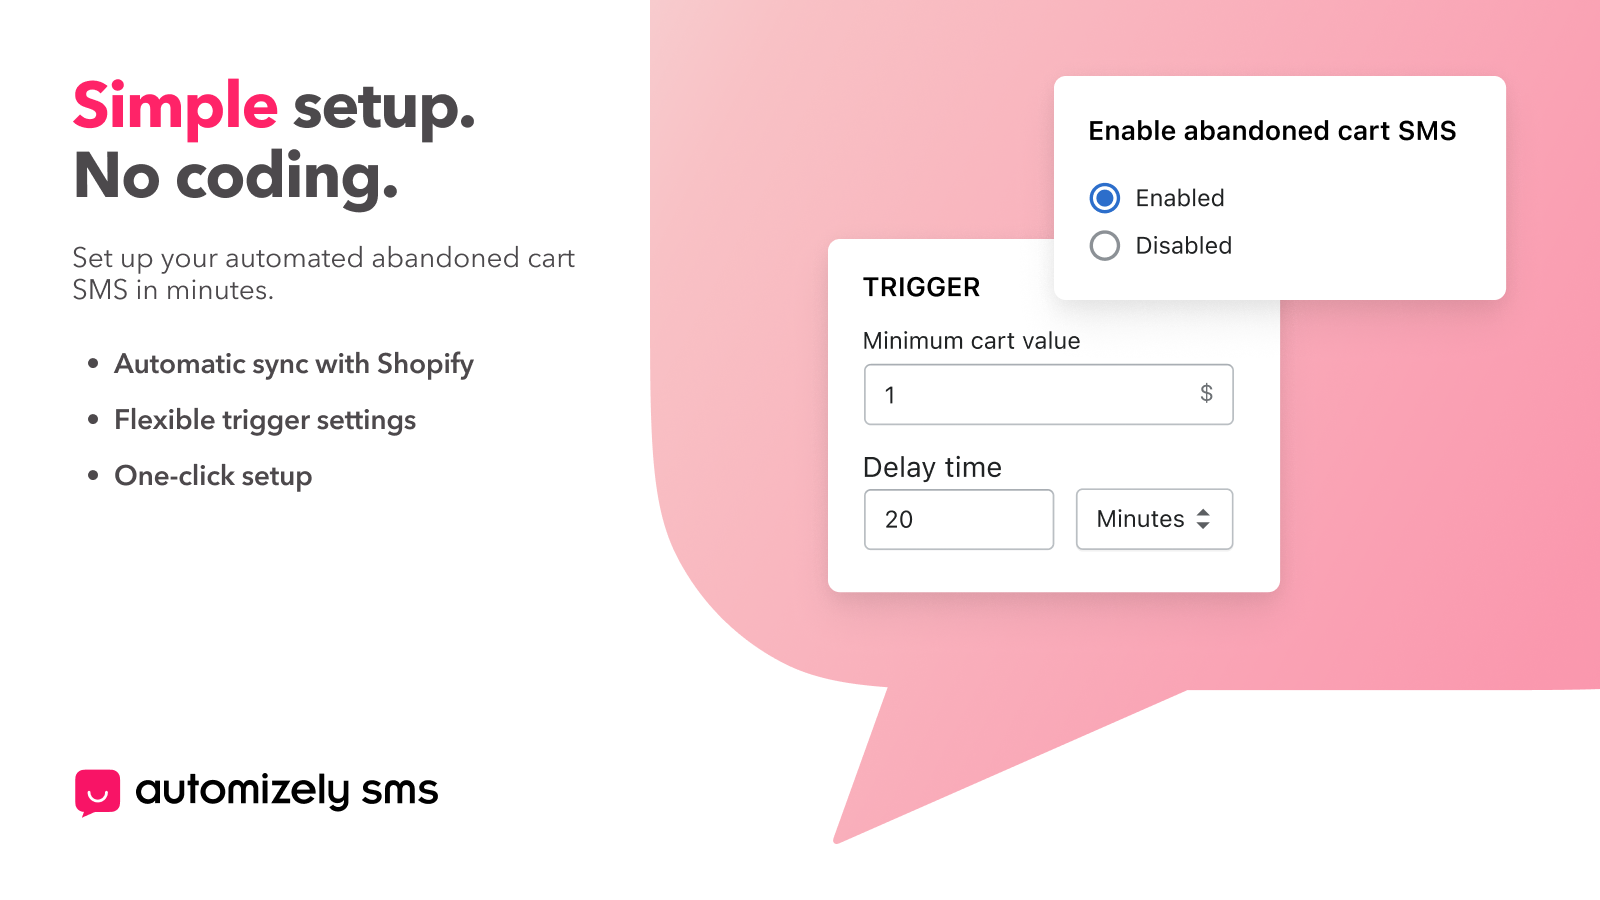 Send automated abandoned cart SMS for your Shopify store.